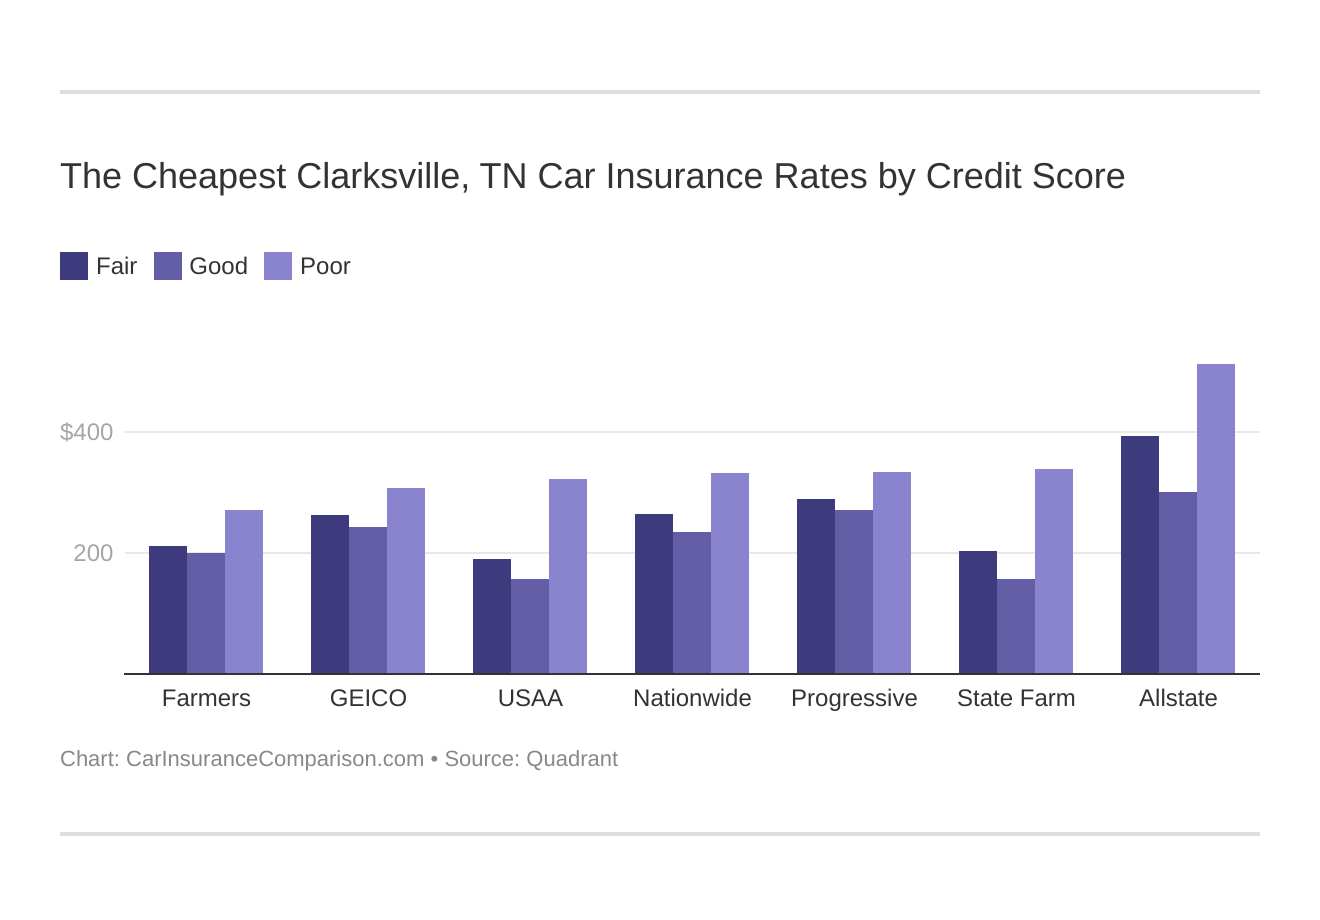 The Cheapest Clarksville, TN Car Insurance Rates by Credit Score